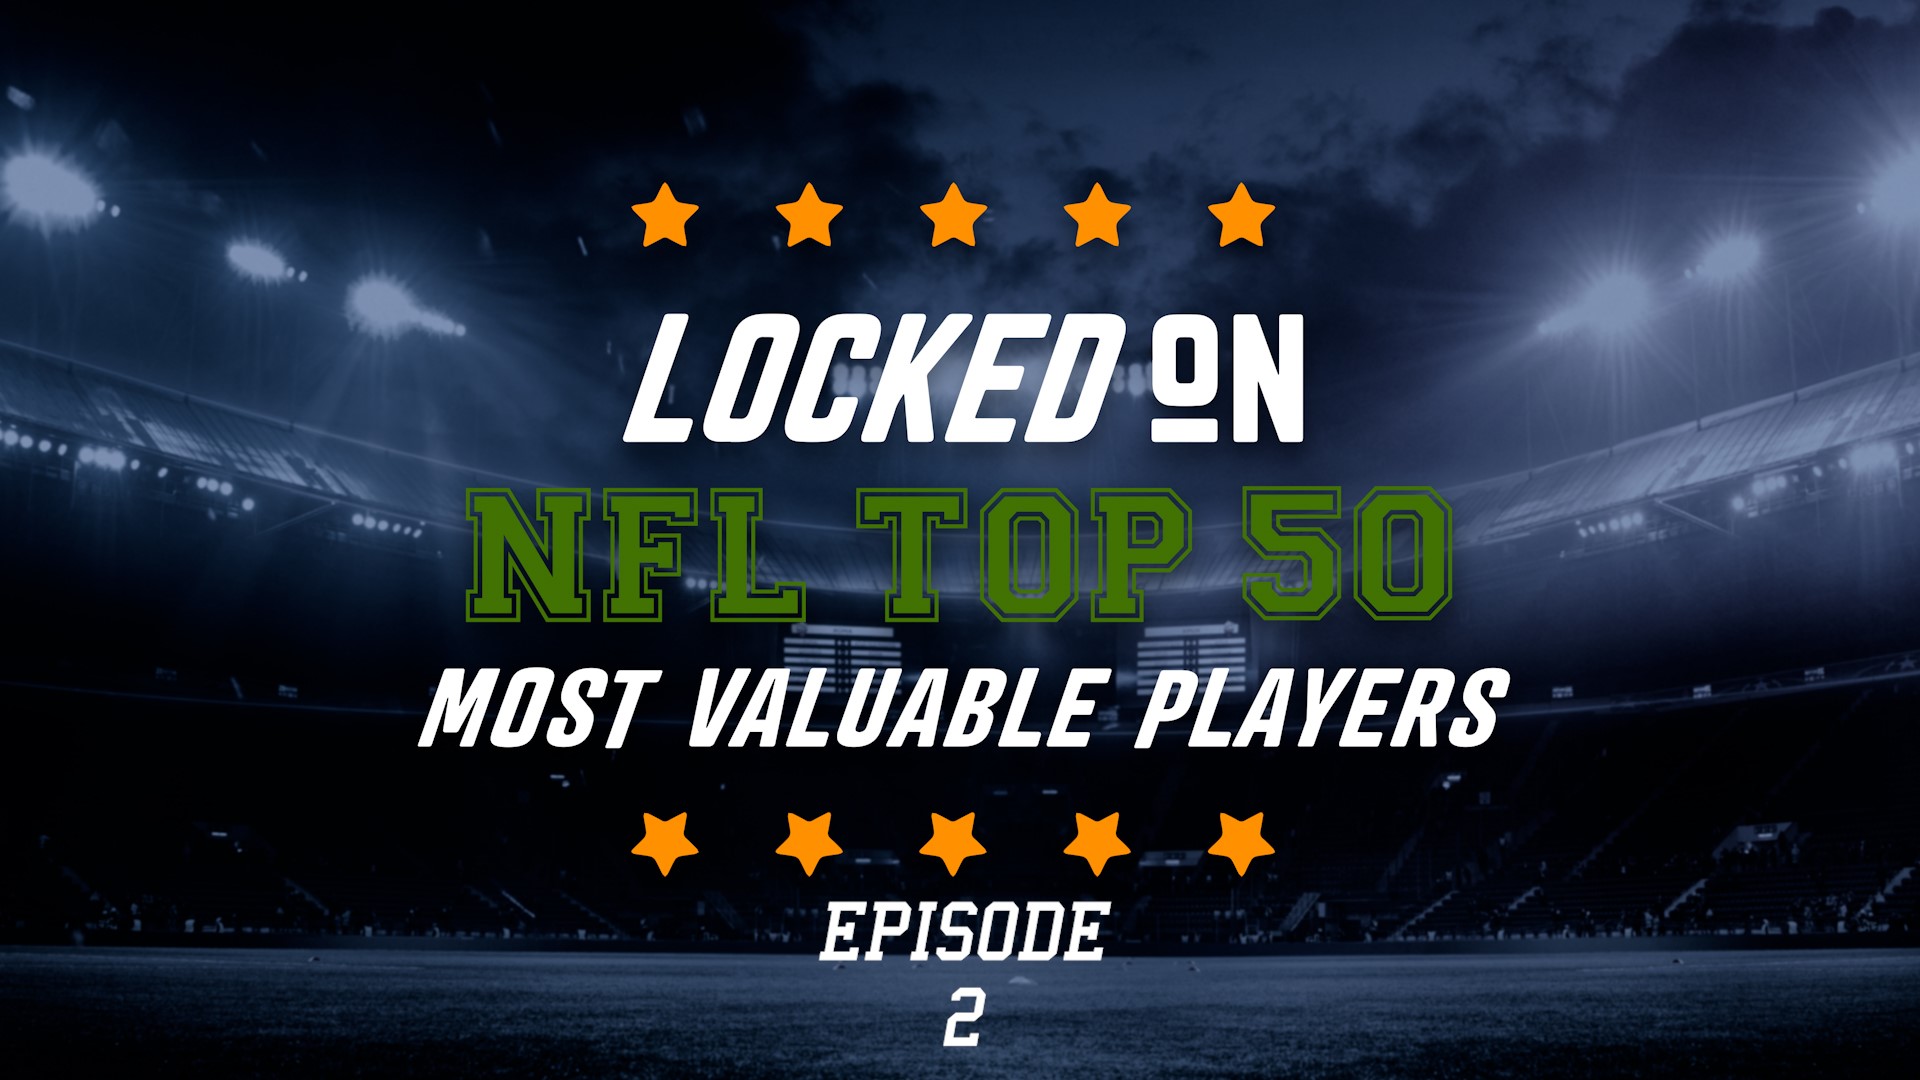 Episode 2 breaks down the most valuable players to their teams, according to BetOnline